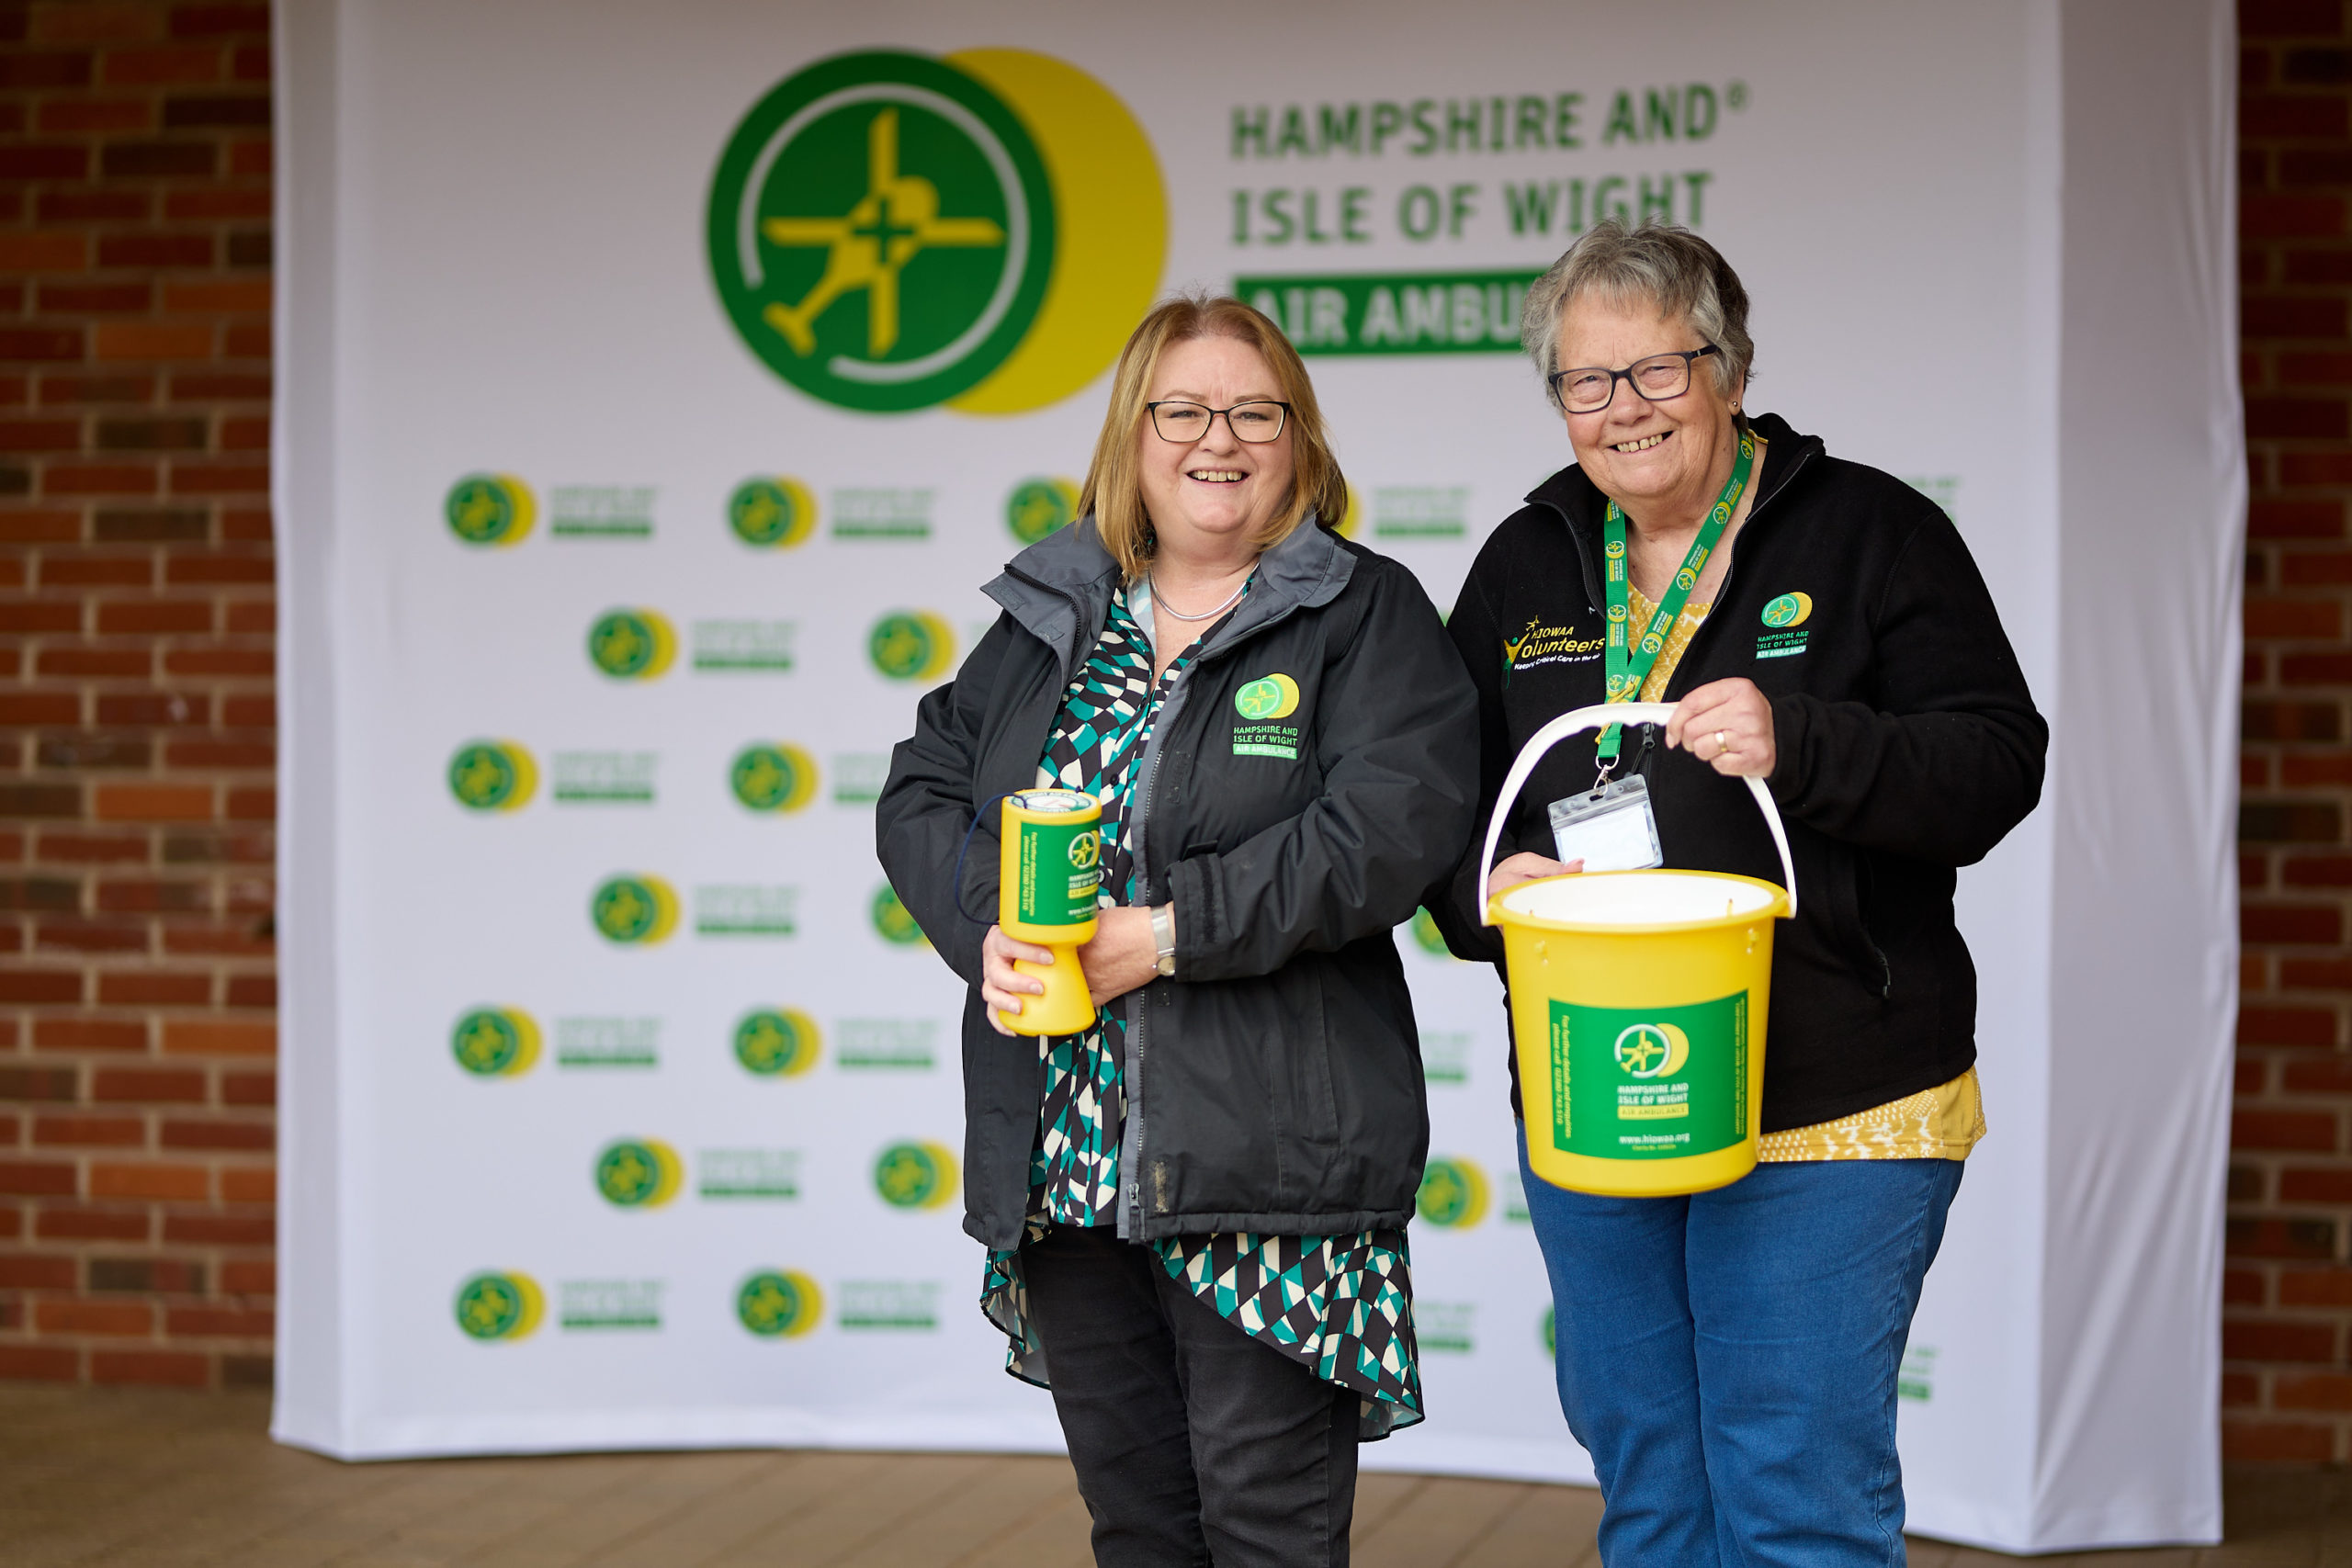 Two volunteers are preparing to assist at an event for the charity. They are carrying a collection pot and bucket and are both smiling